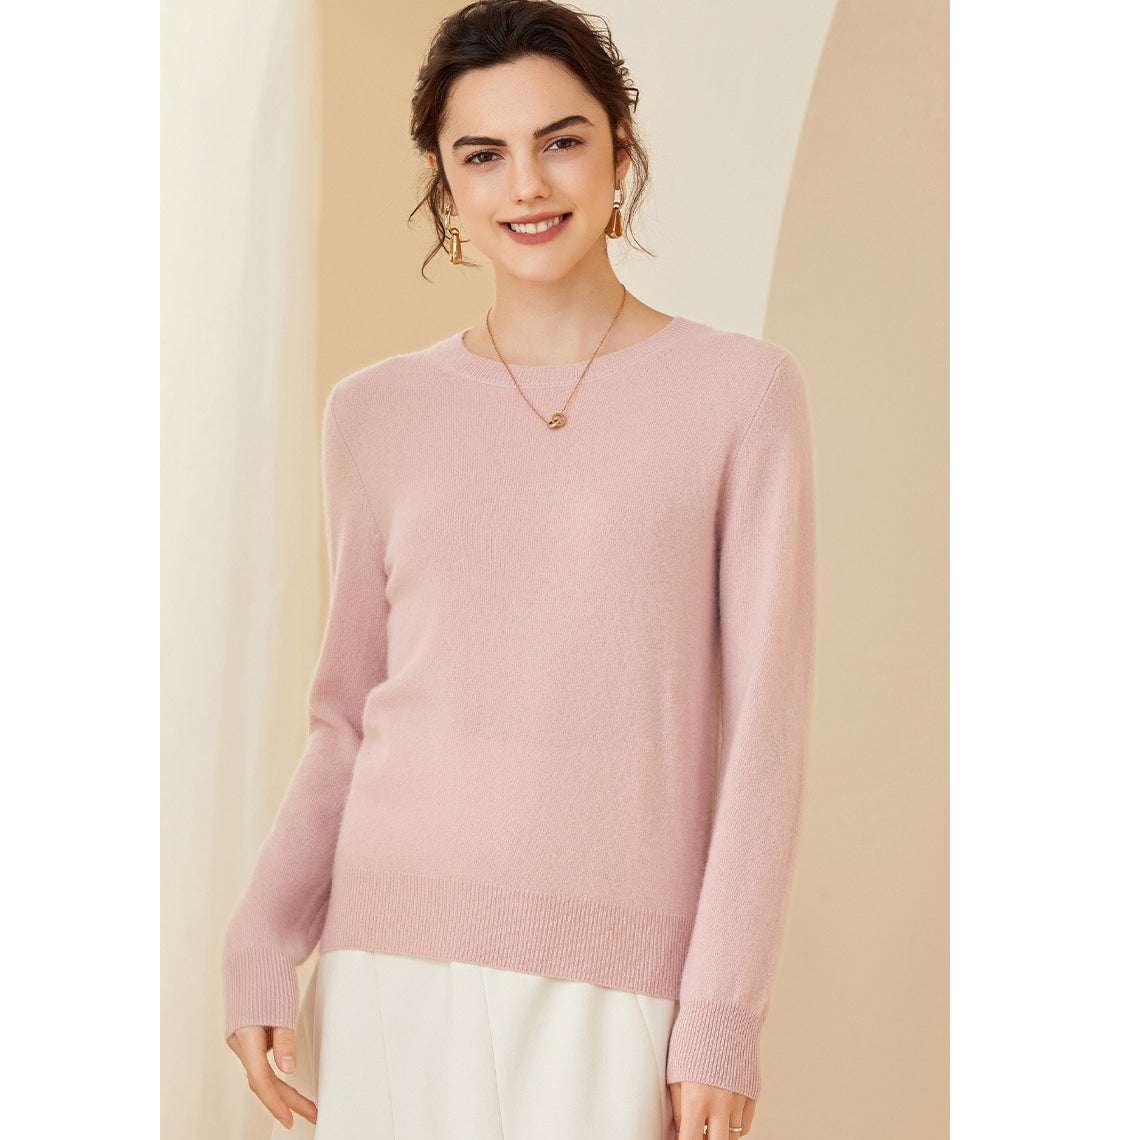 Cashmere Sweater For Women Classic Long Sleeve Pullover Cashmere Tops